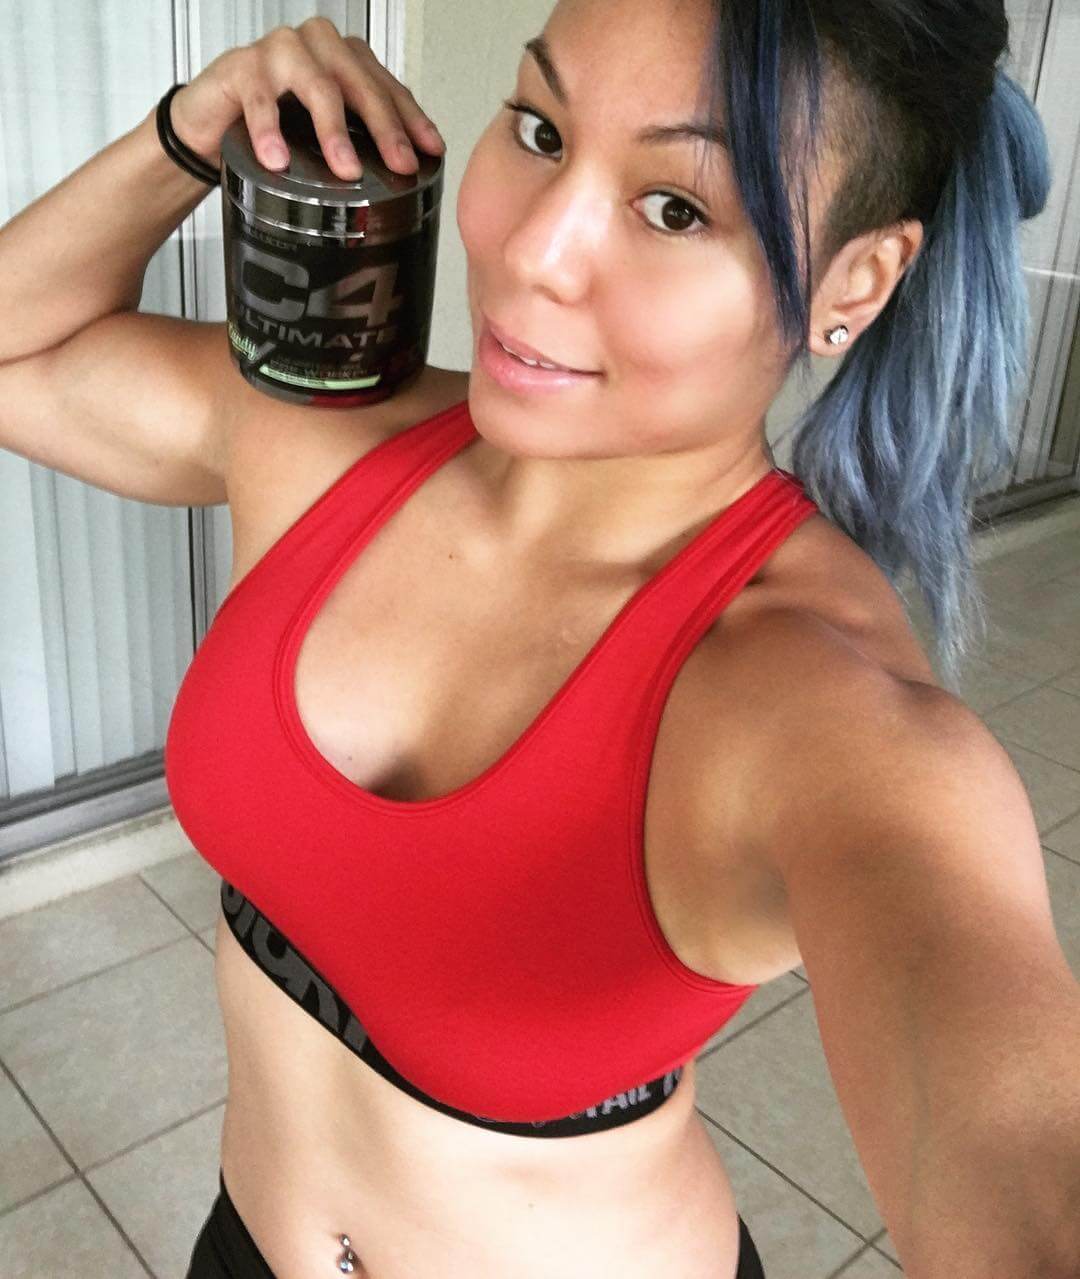 60+ Hot Pictures Of Mia Yim Which Are Wet Dreams Stuff | Best Of Comic Books